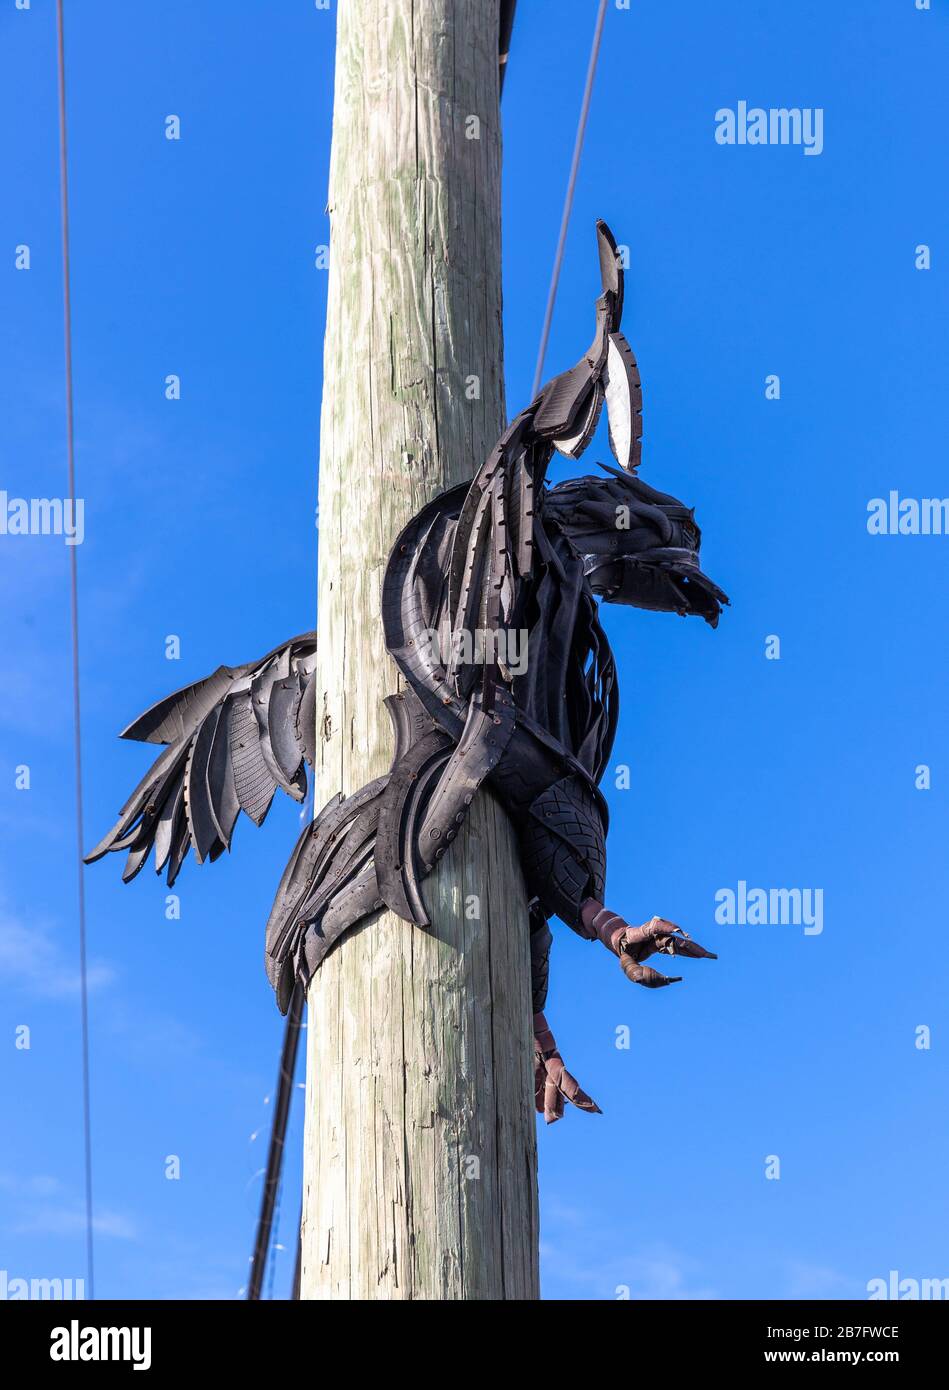 An eagle sculpture, made of rubber pieces, fixed on a wooden pole, Wynwood Art District, Miami, Florida, USA. Stock Photo